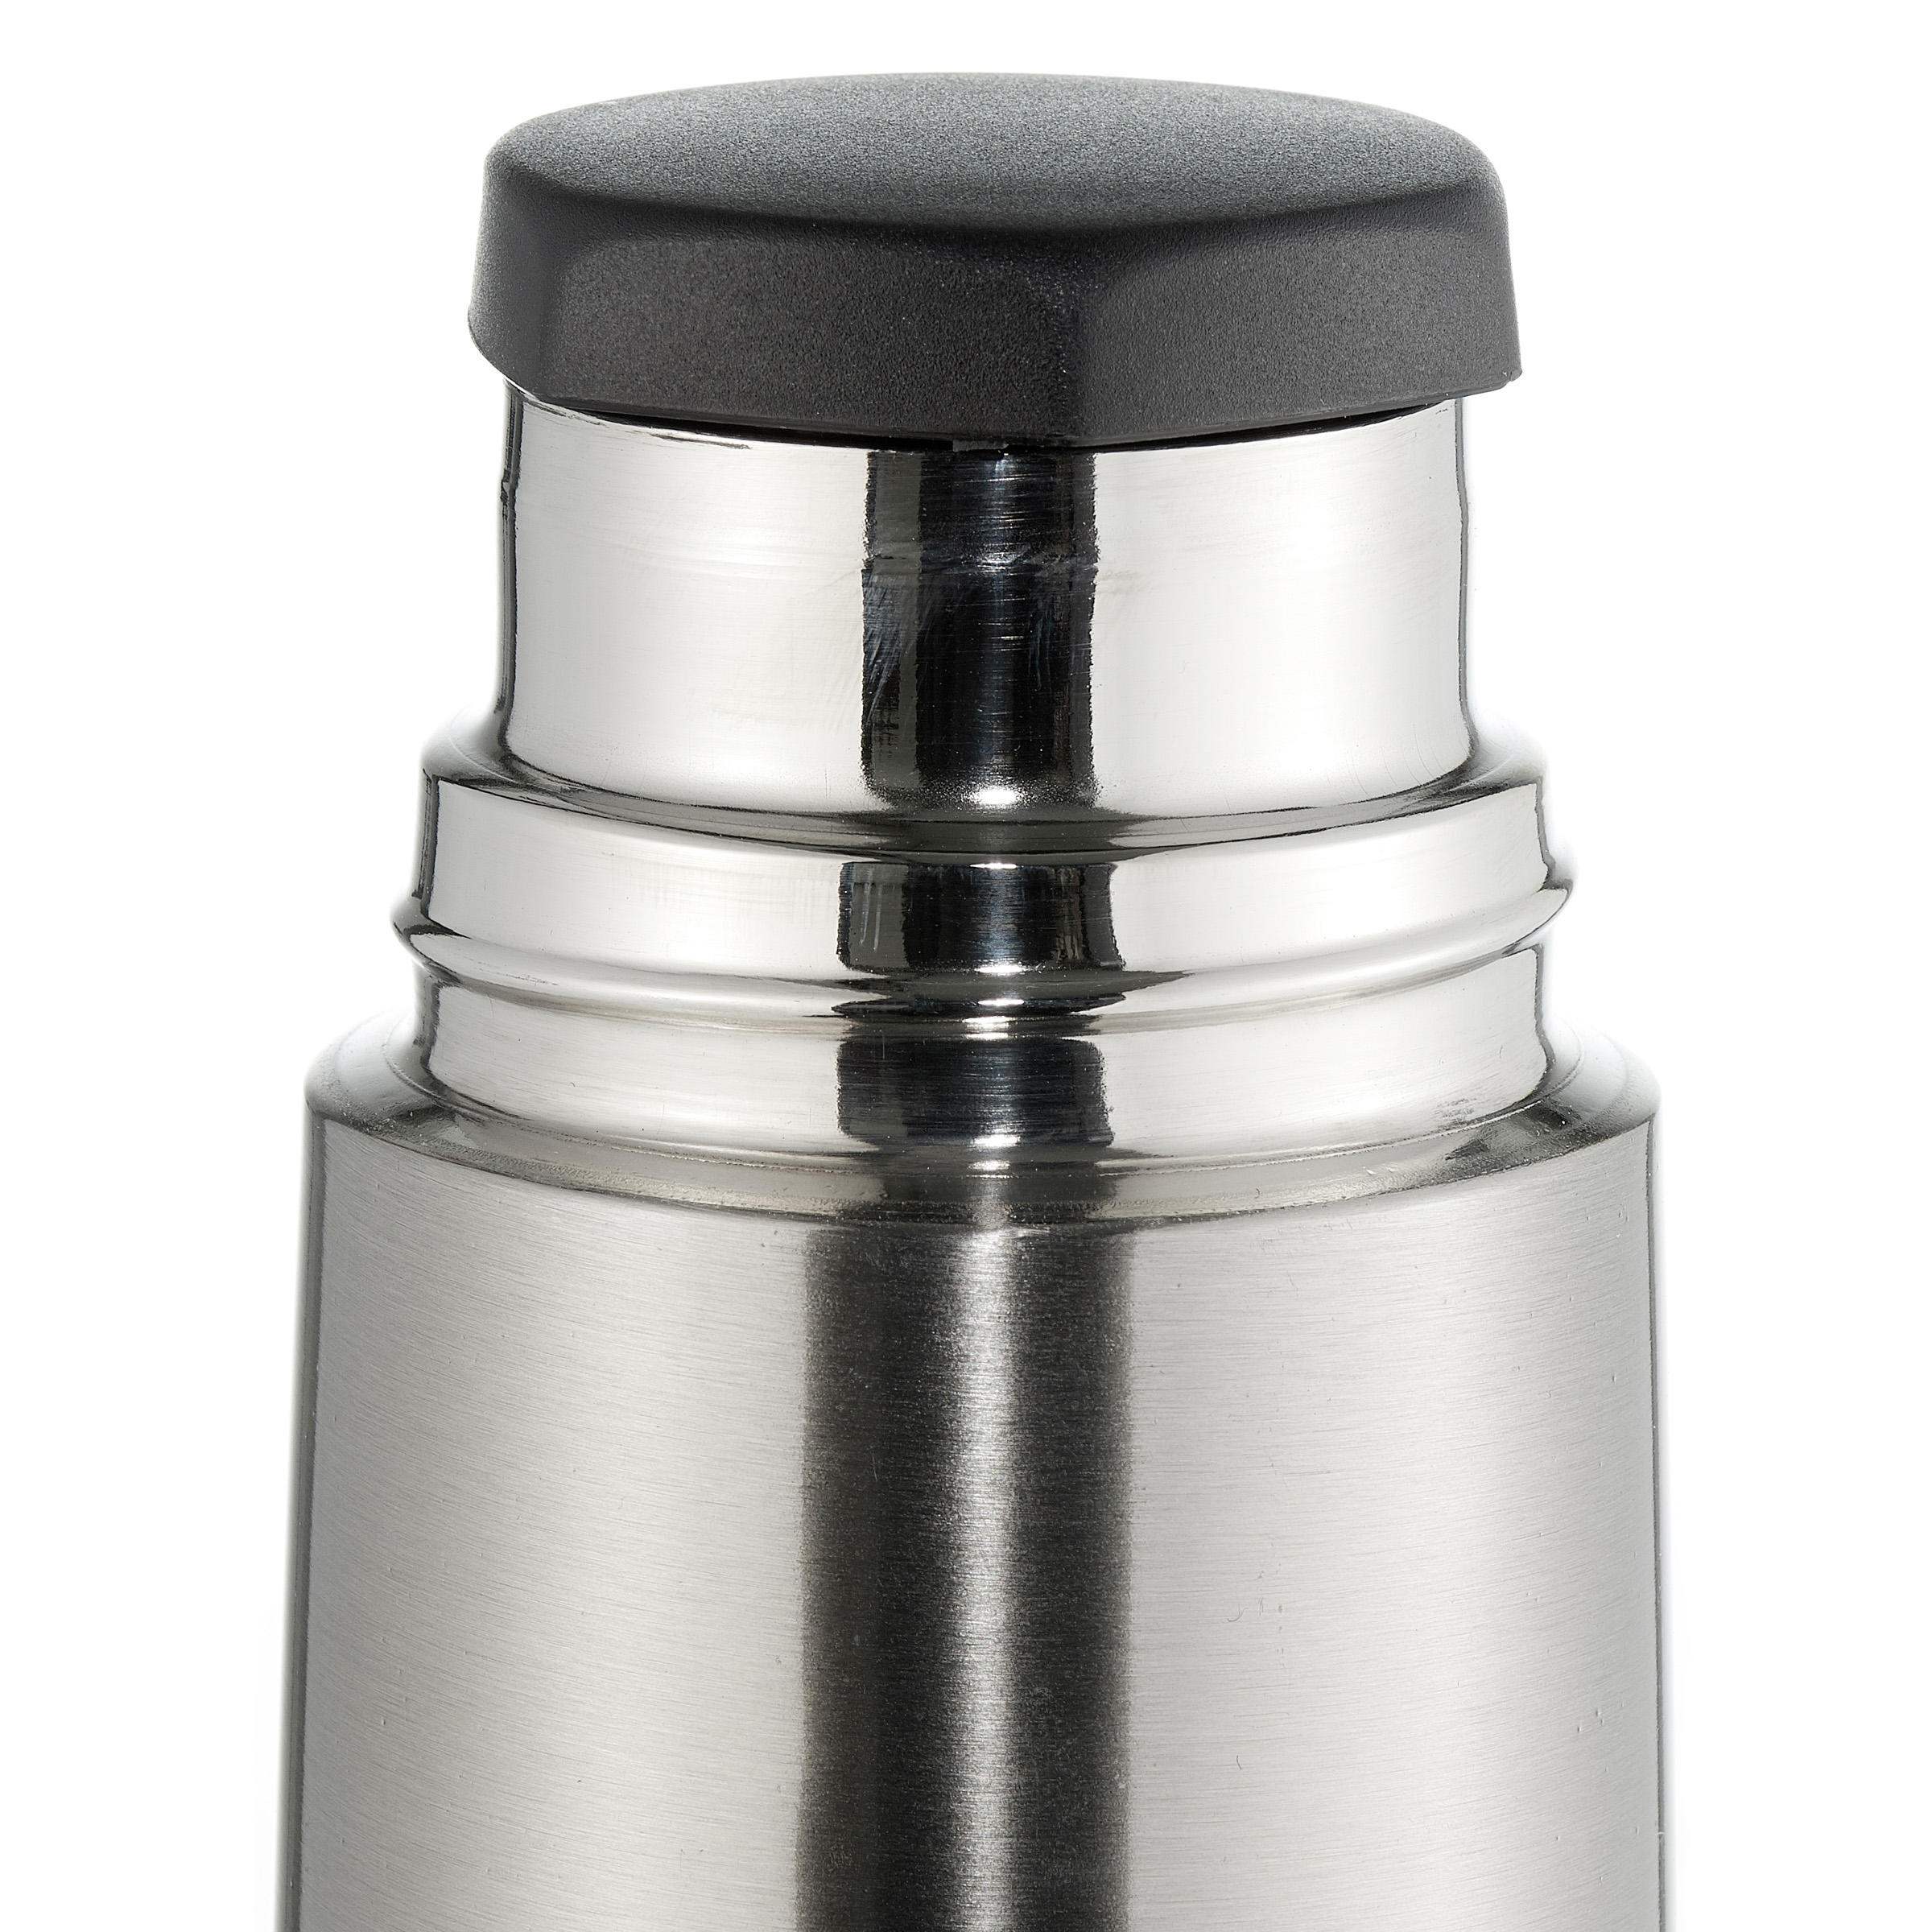 Stainless steel 0.7 L insulated bottle with cup for hiking - metal 6/10